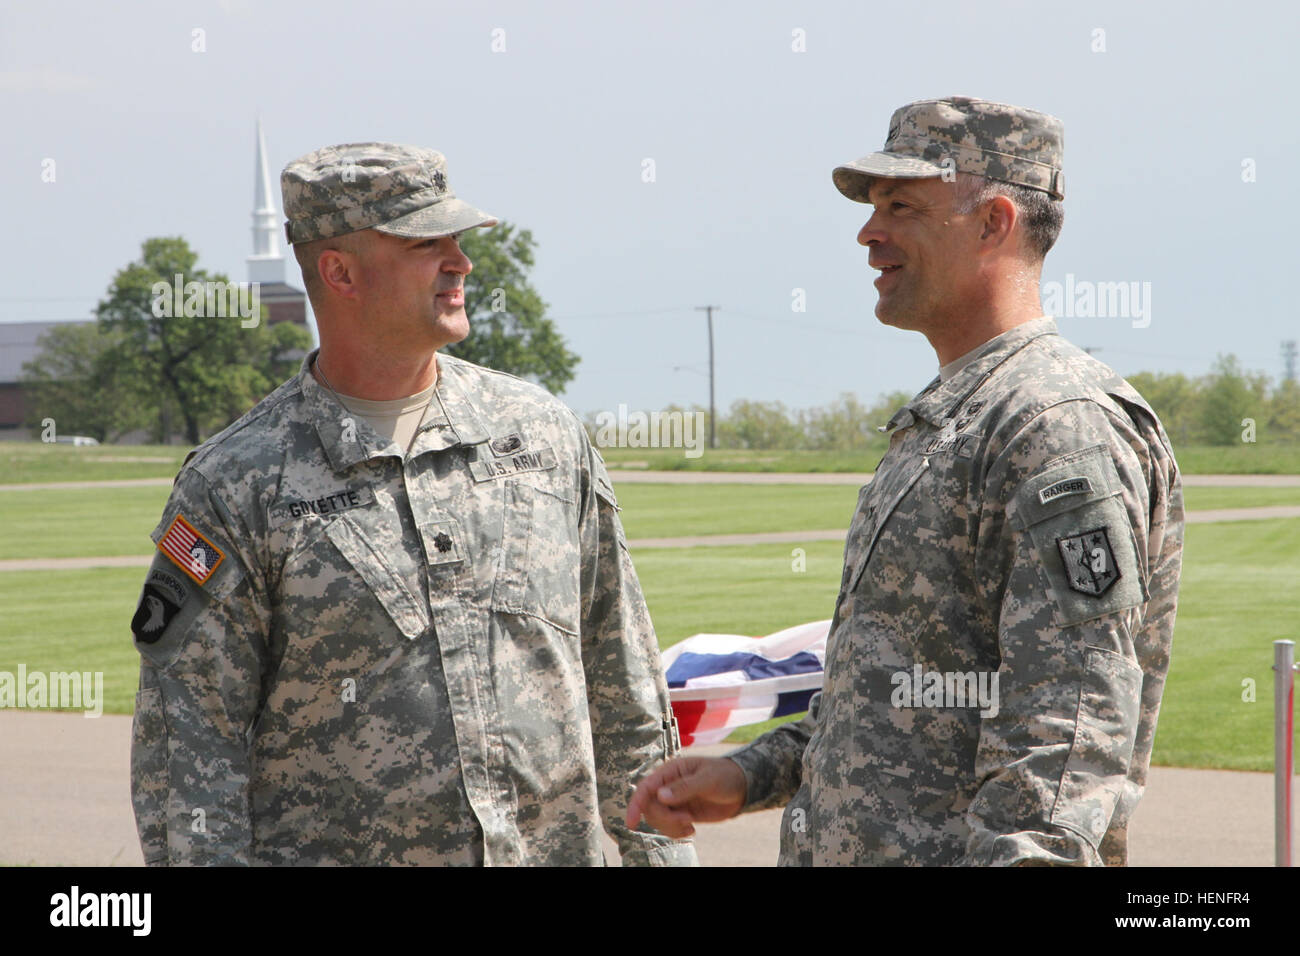 Lt. Col. Chad D. Goyette shares a few words with Col. James F. Reckard III, 4th Maneuver Enhancement Brigade commander, after Goyette officially assumed command of the 92nd Military Police Battalion, 4th MEB, 1st Infantry Division, May 7, 2014. (Photo by U.S. Army Sgt. Kelly S. Malone) Soldier left a private, returned a commander 140507-A-KX047-003 Stock Photo